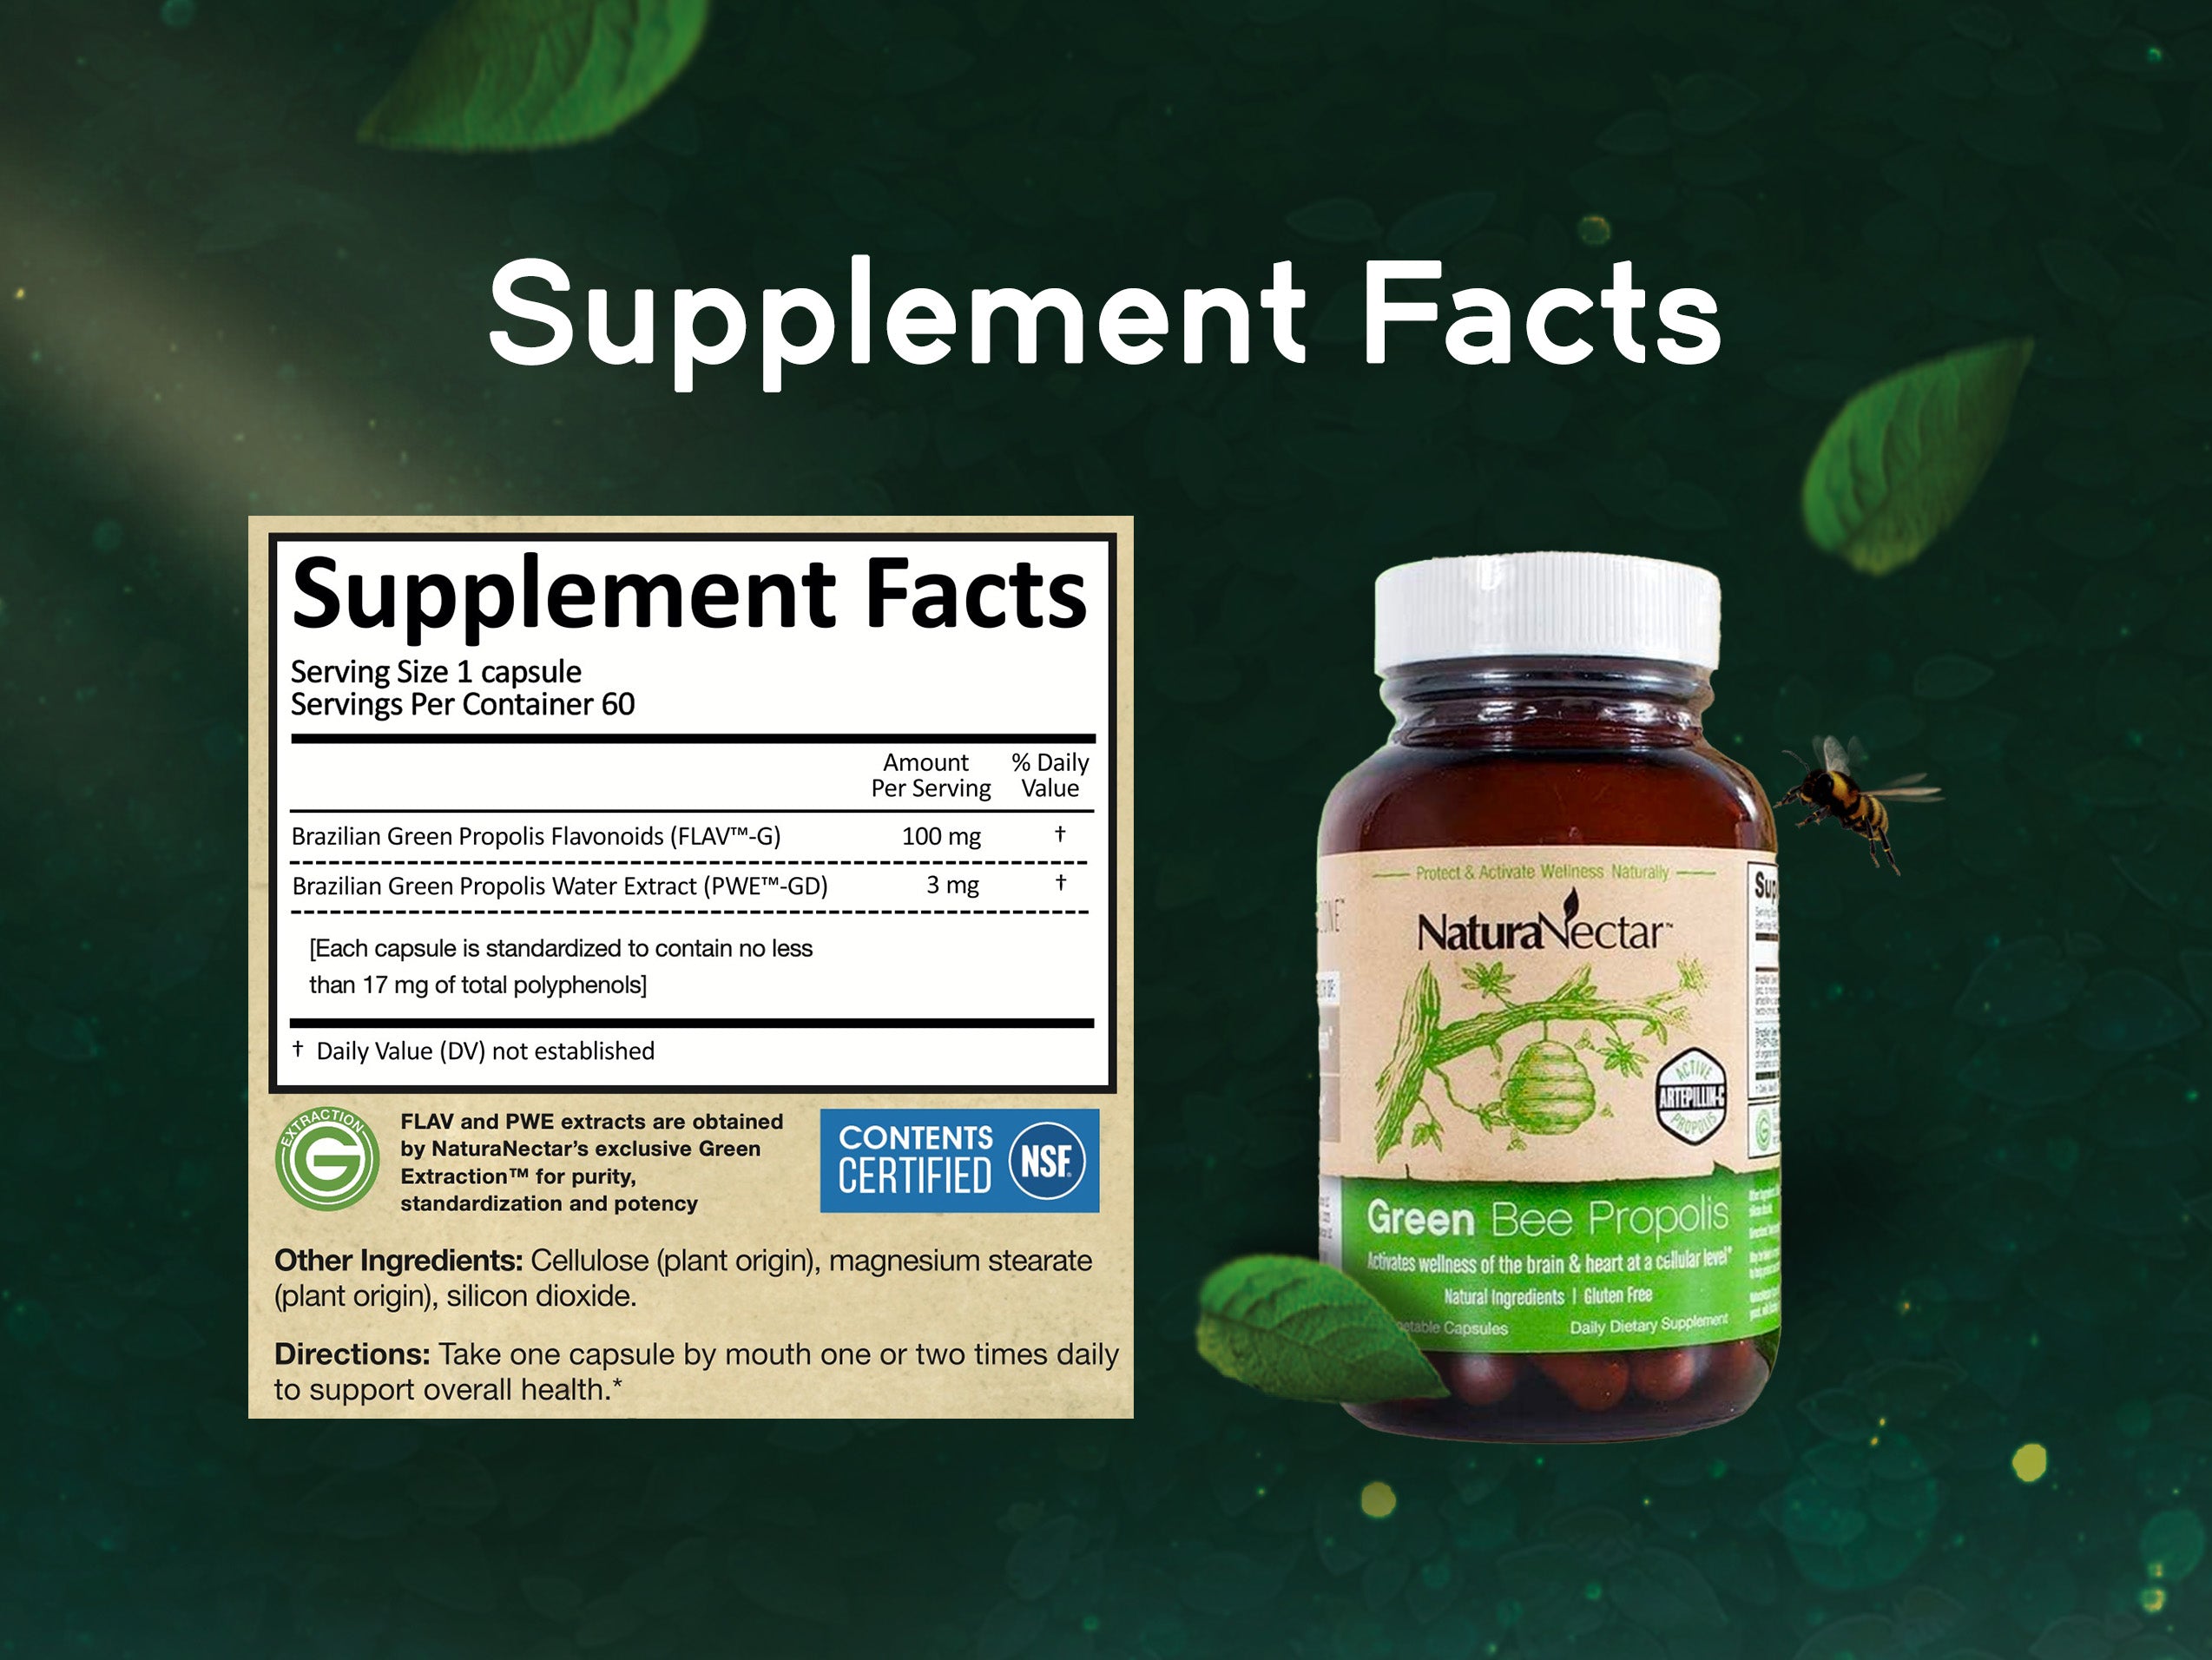 Green Bee Propolis - Nootropic product supports wellness of your brain* & immune system health* through health-promoting polyphenols like Artepillin-C  - Pack of 3